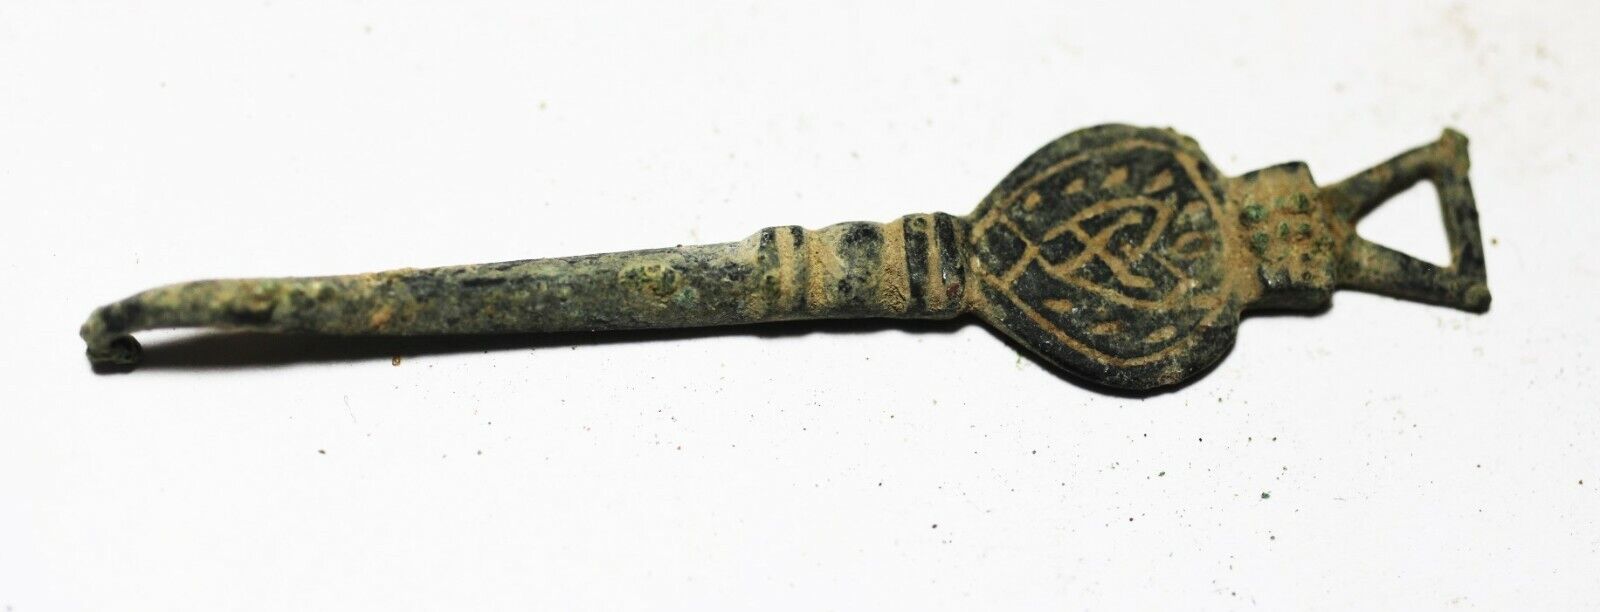 ZURQIEH -AS23375- ANCIENT ROMAN BRONZE NEEDLE OR FISHING HOOK. 200 - 300 A.D